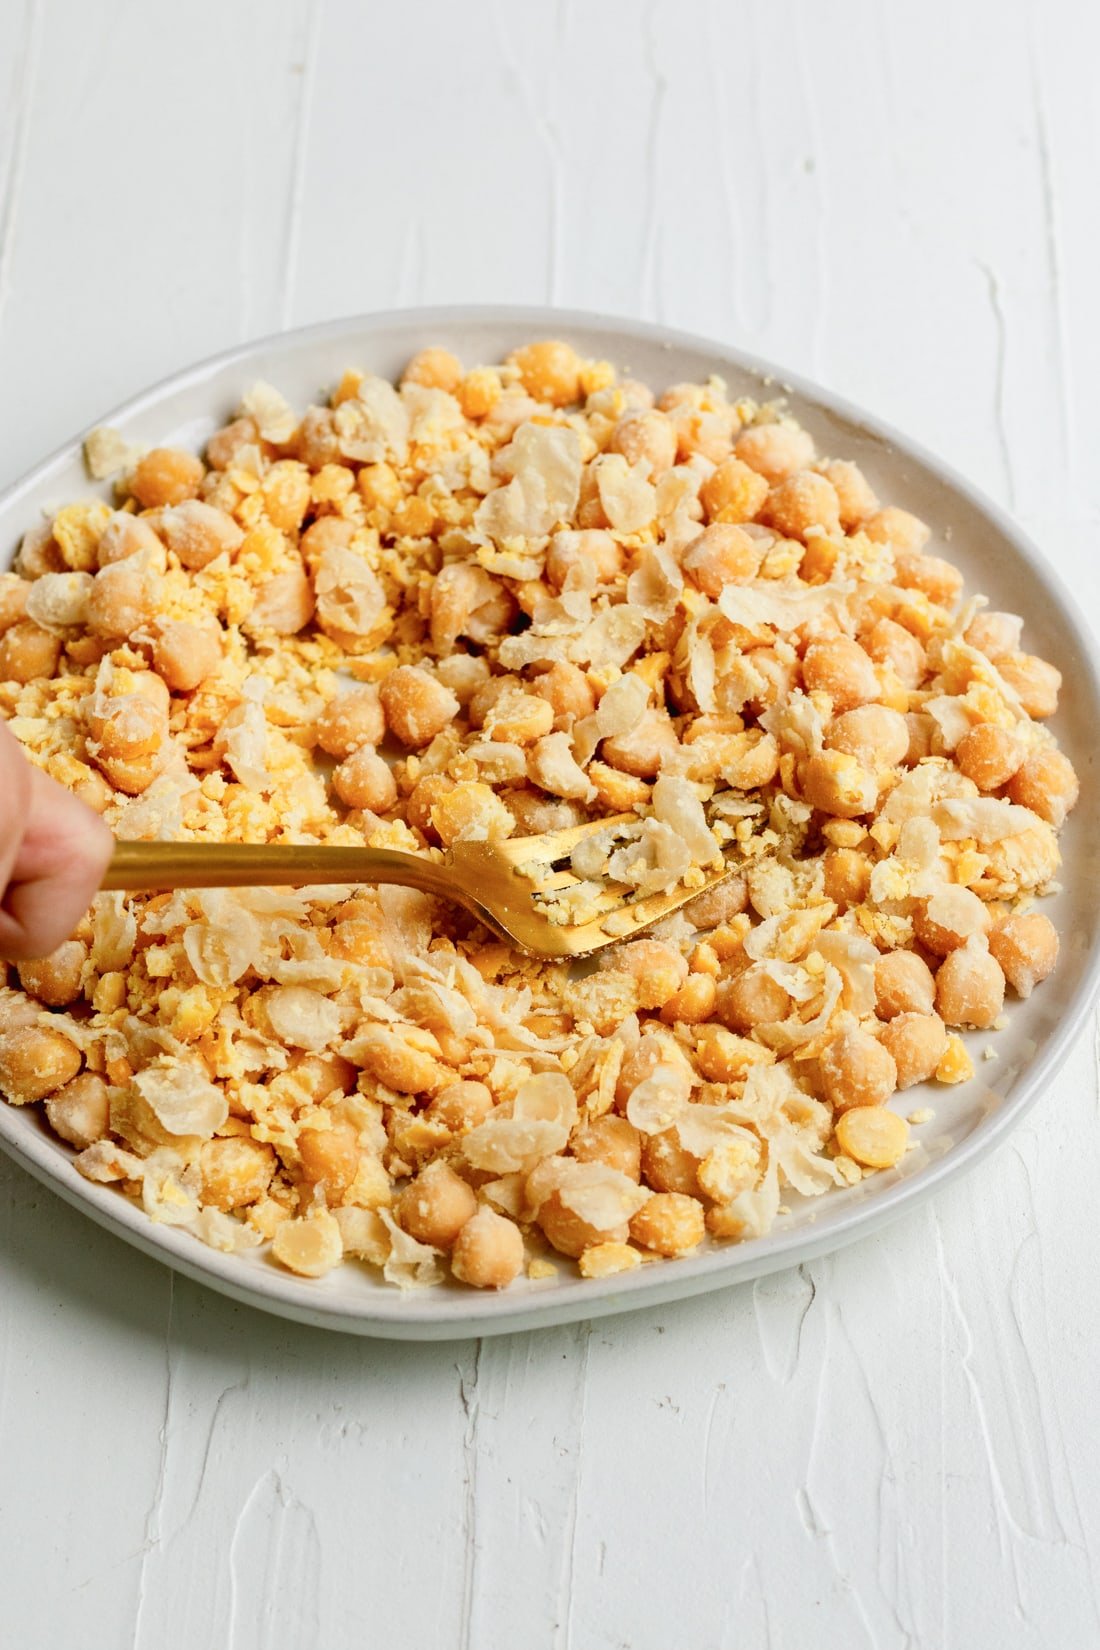 mashing softened chickpeas on a plate